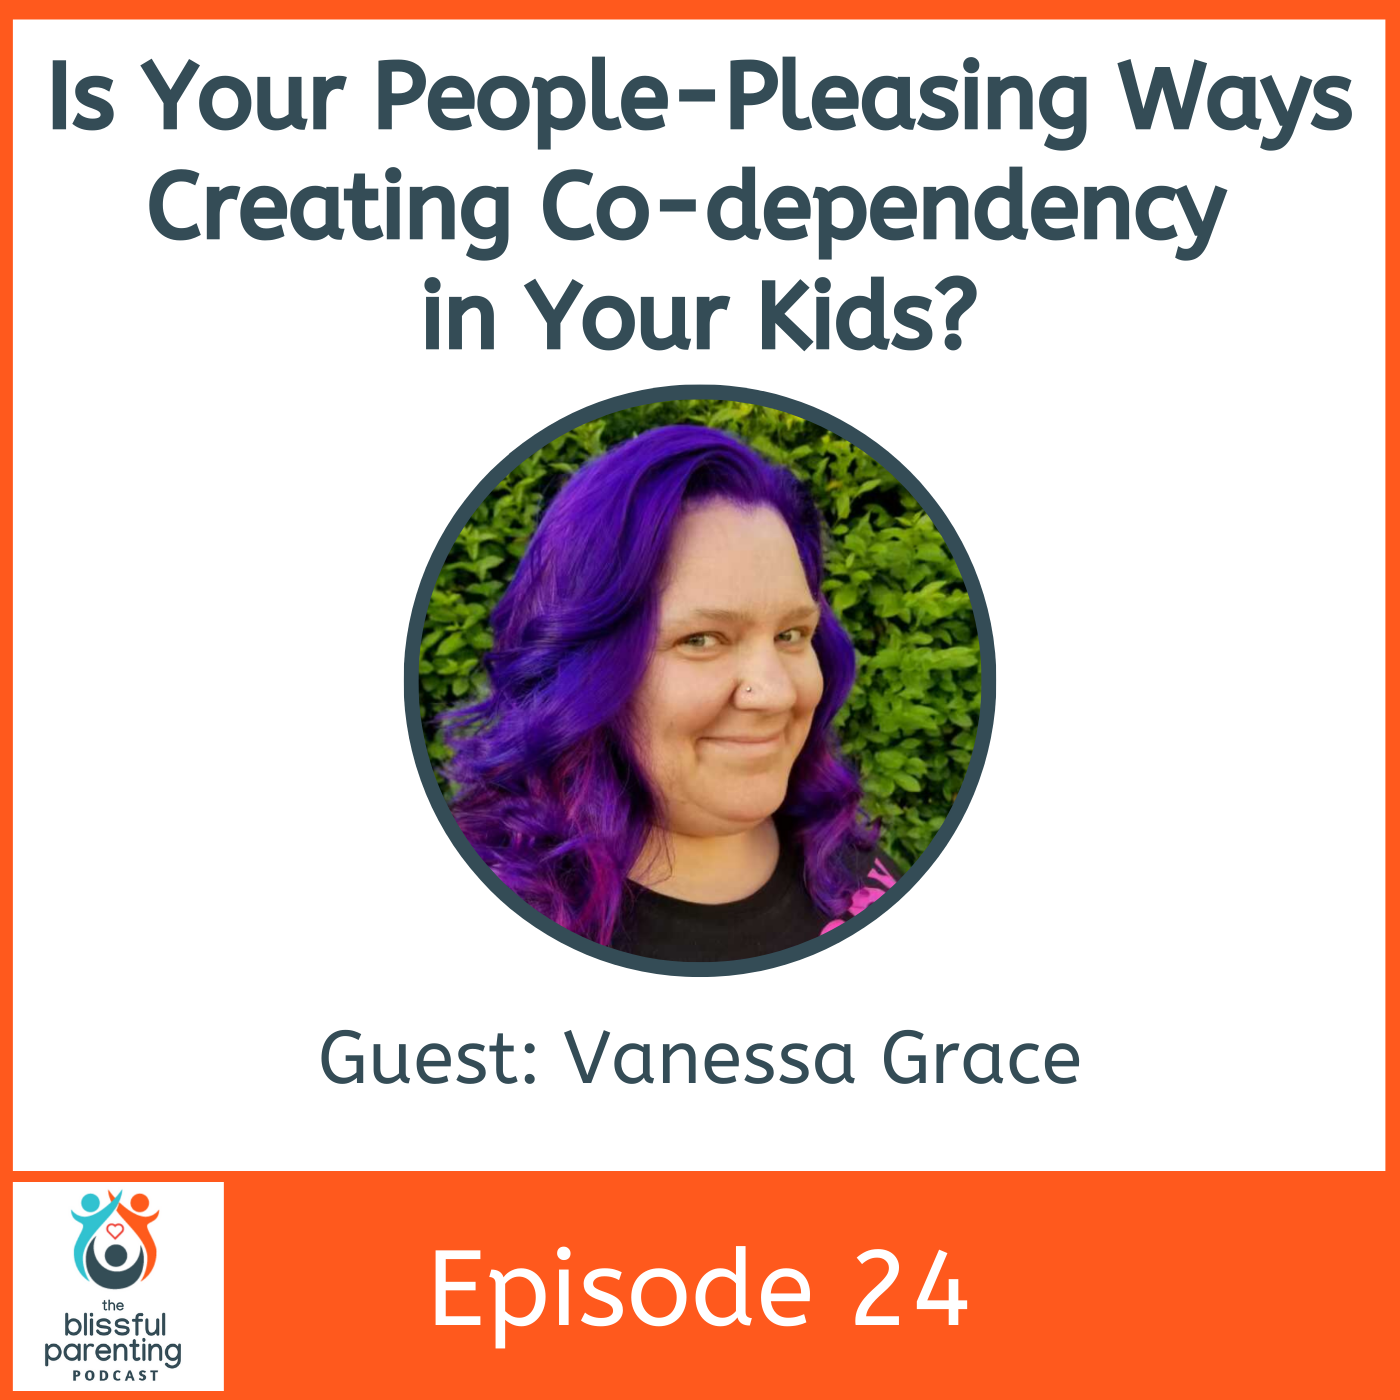 Episode image for Are Your People-Pleasing Ways Creating Co-dependency in Your Kids?